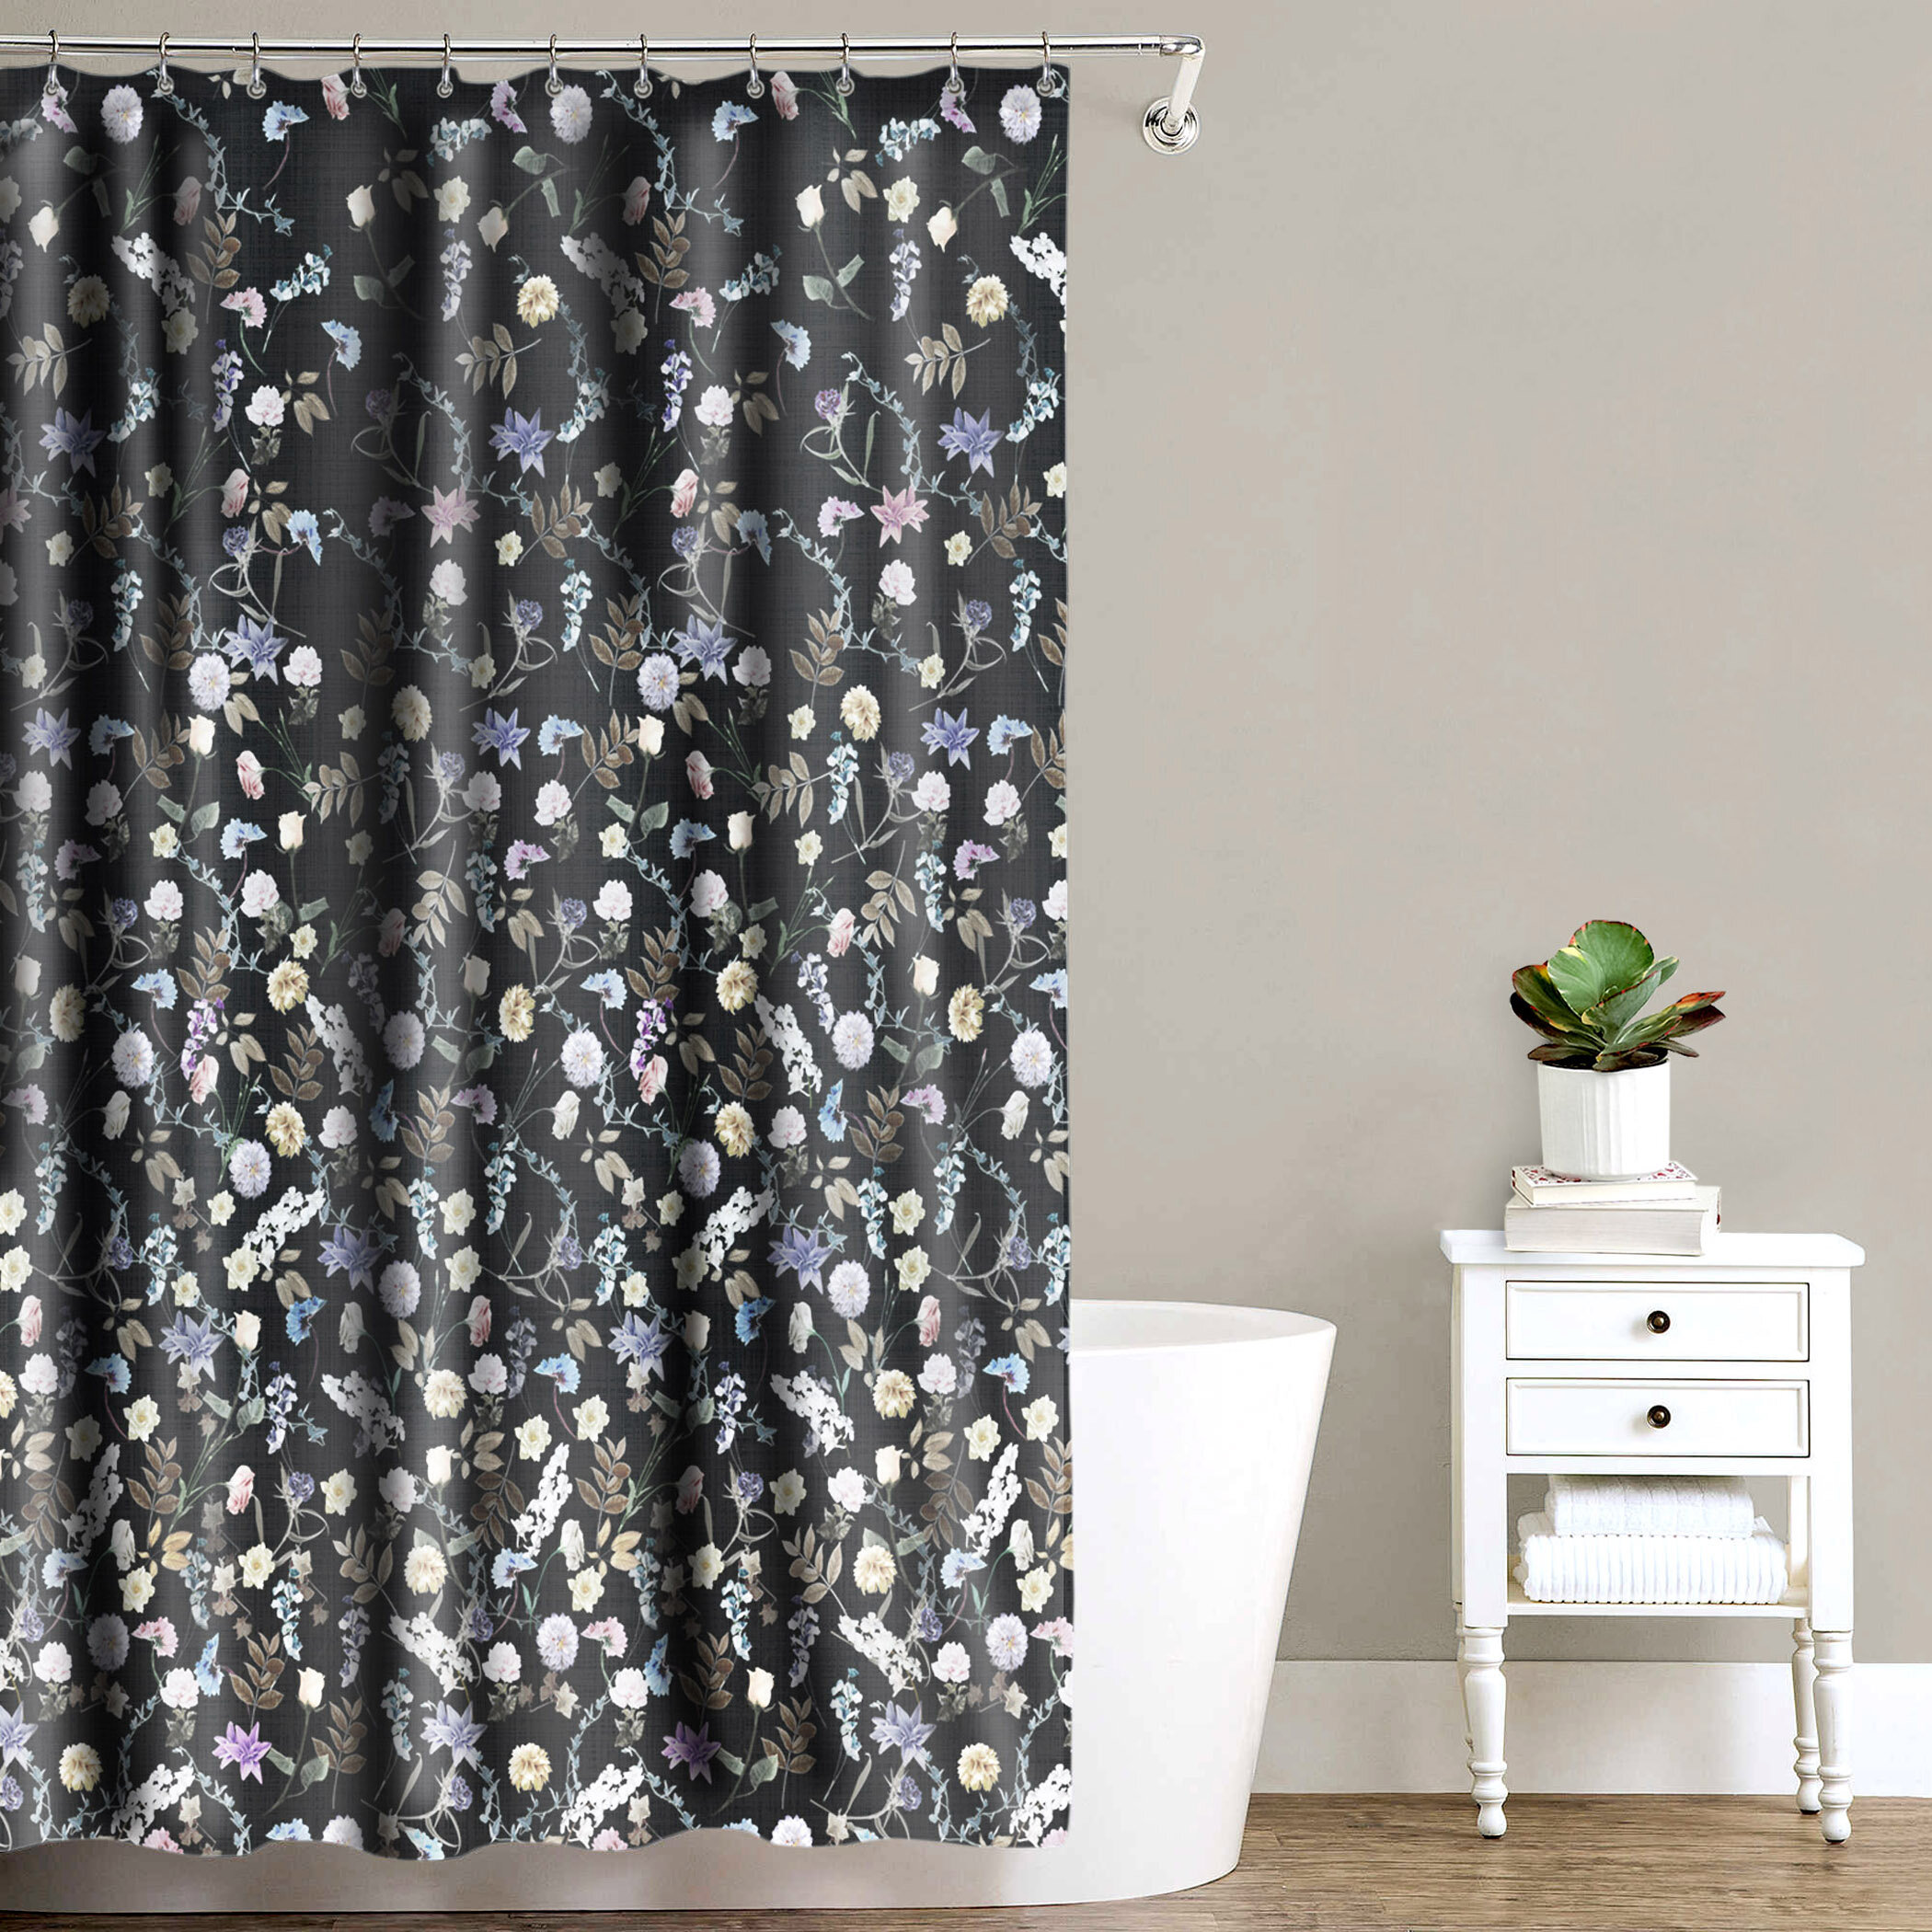 bathrooms with shower curtains